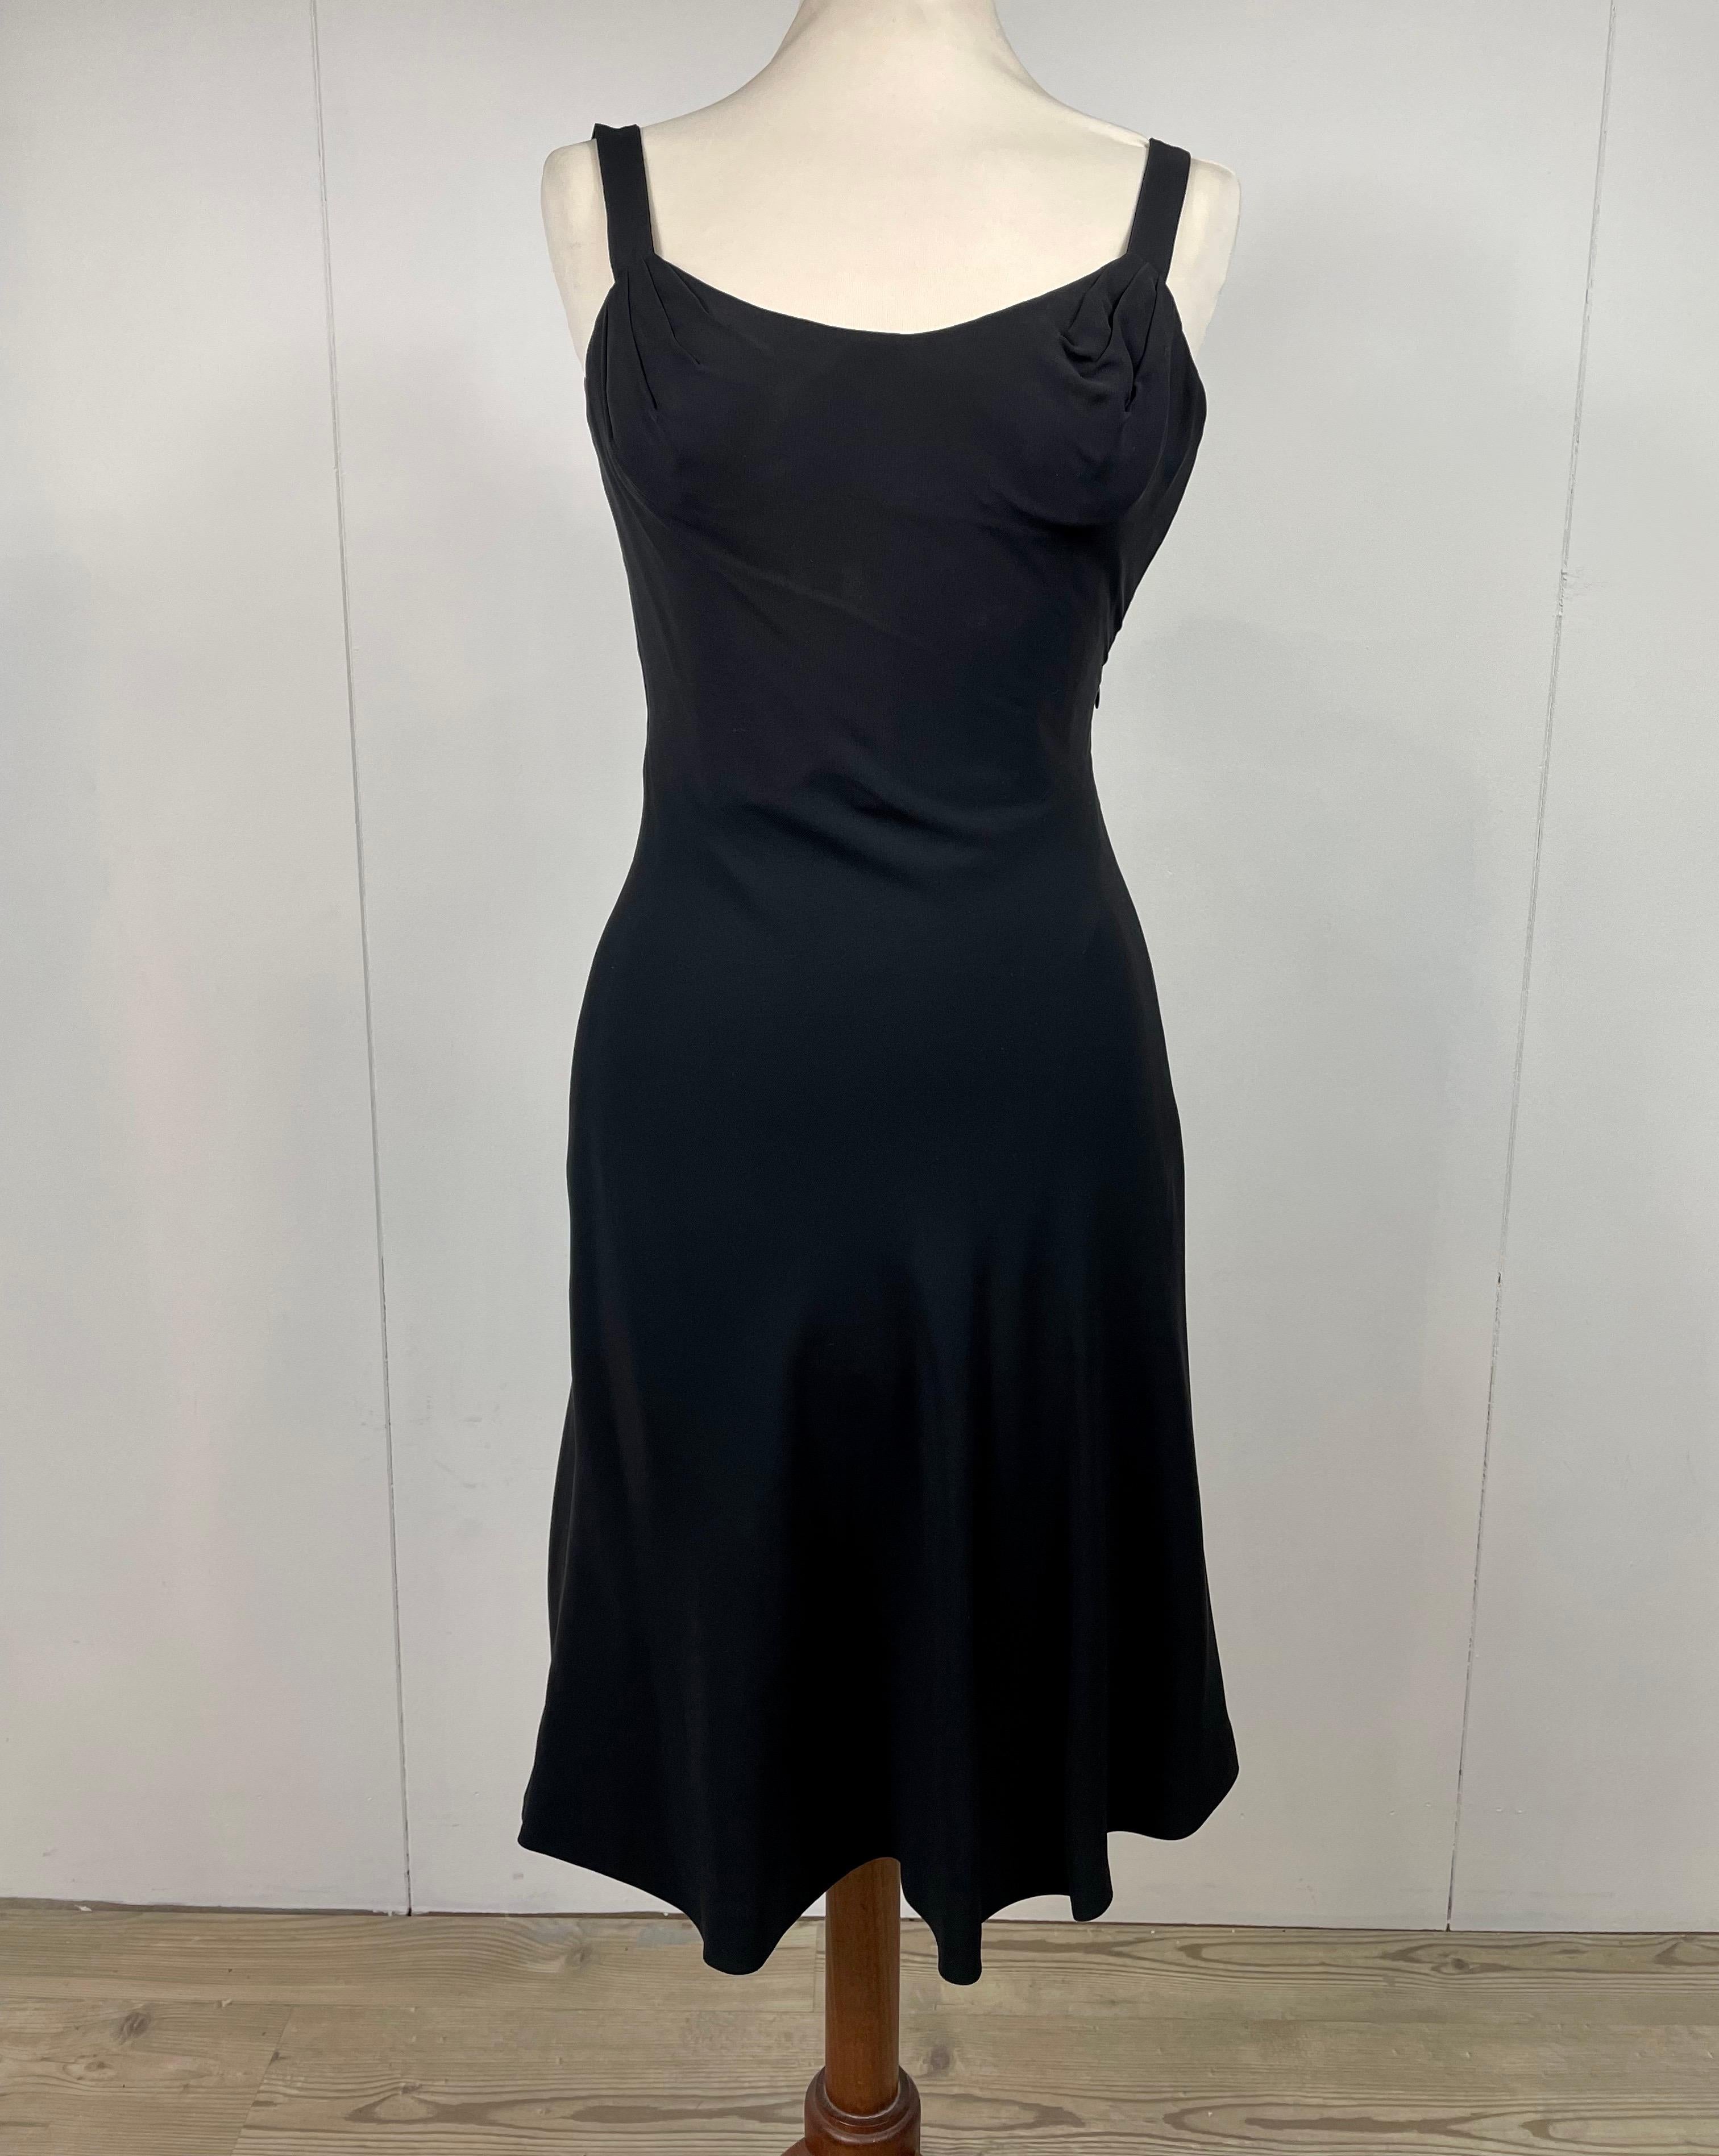 Gianni Versace dress from the Spring 1996 ready to wear collection.
In 93% silk, 5% poly and 2% elastane.
Size indicated 4.
breast 36 cm
waist 32 cm
100 cm long.
In excellent condition.